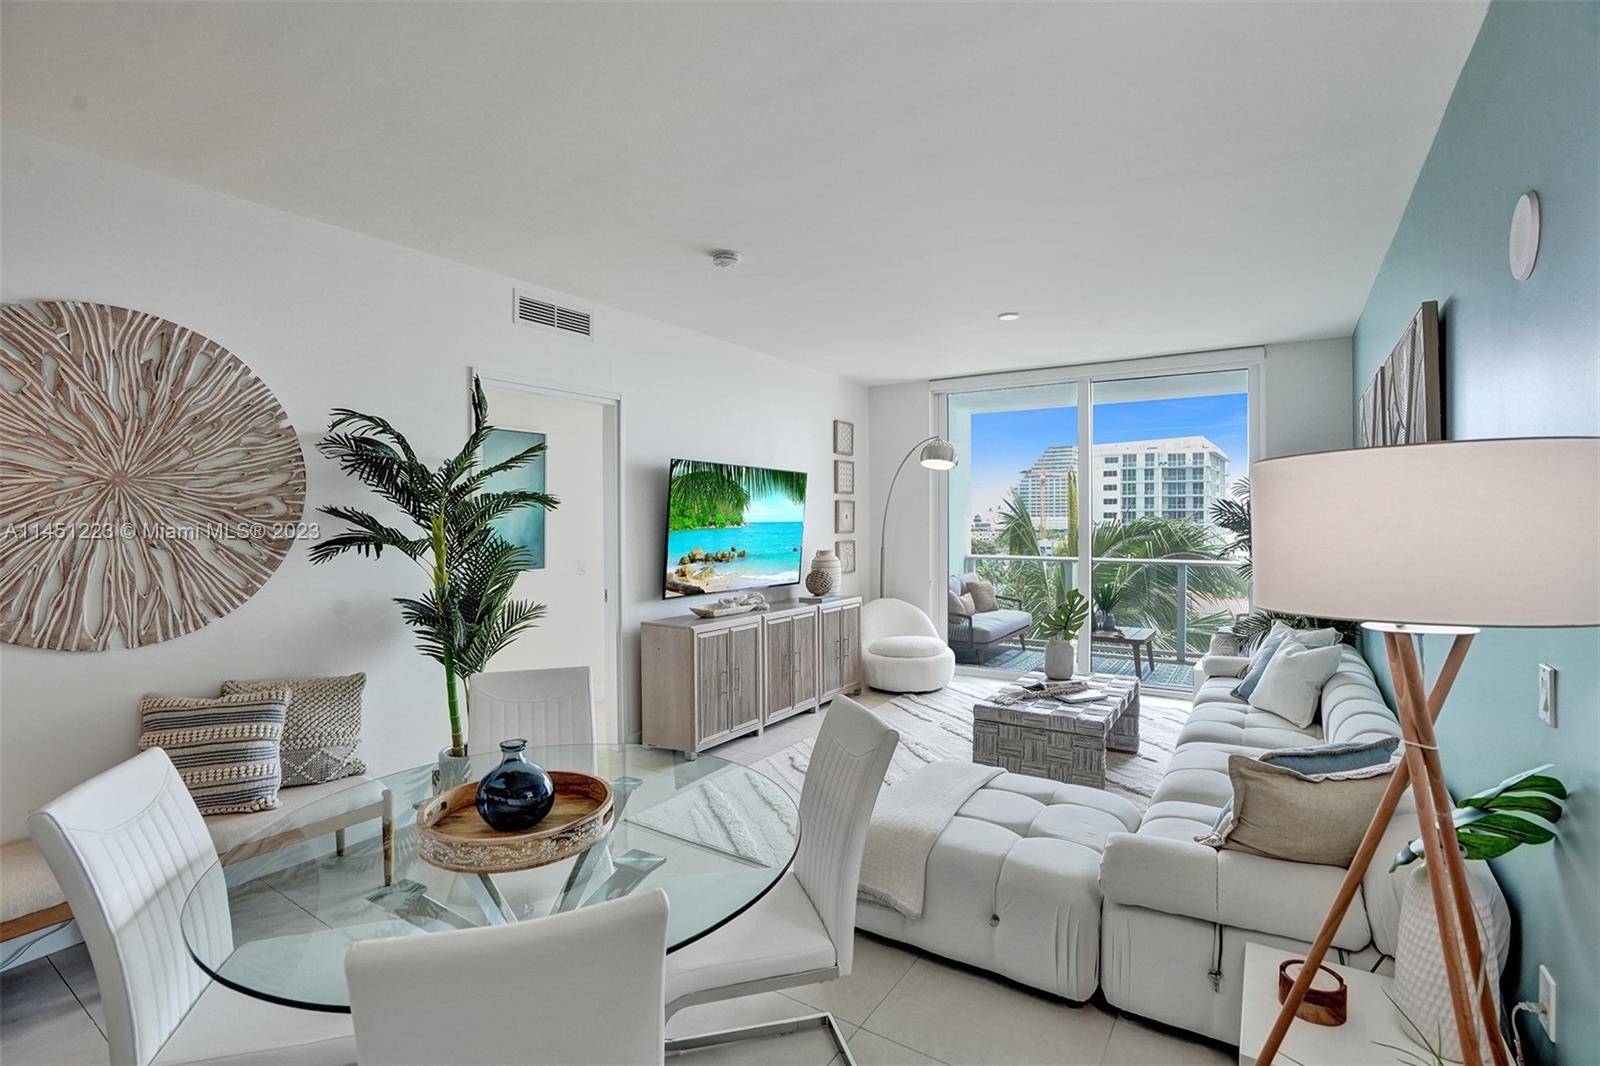 Newly available seasonal rental in the highly sought after Tiffany House Residences on Fort Lauderdale Beach.